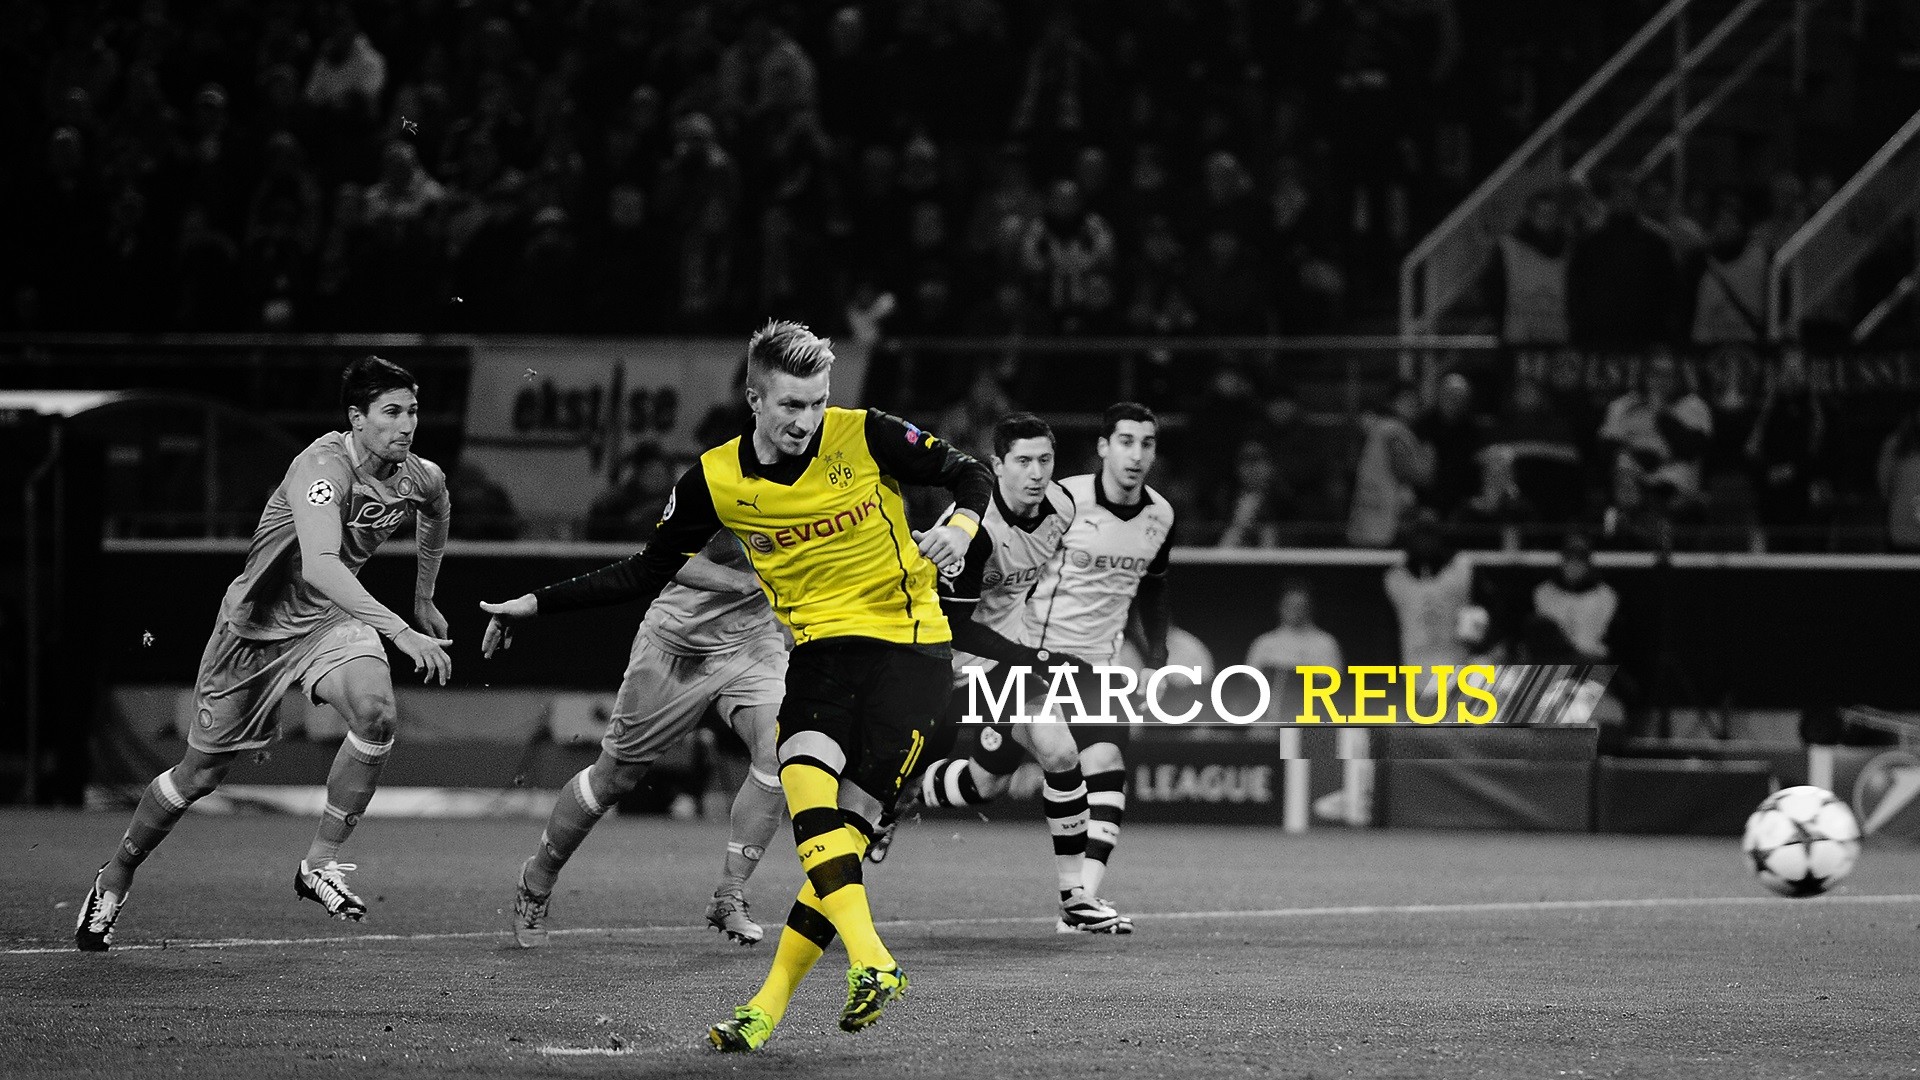 Marco Reus Wallpaper HD Apk Download for Android- Latest version 1.0-  com.awesomewallpapers.MarcoReus